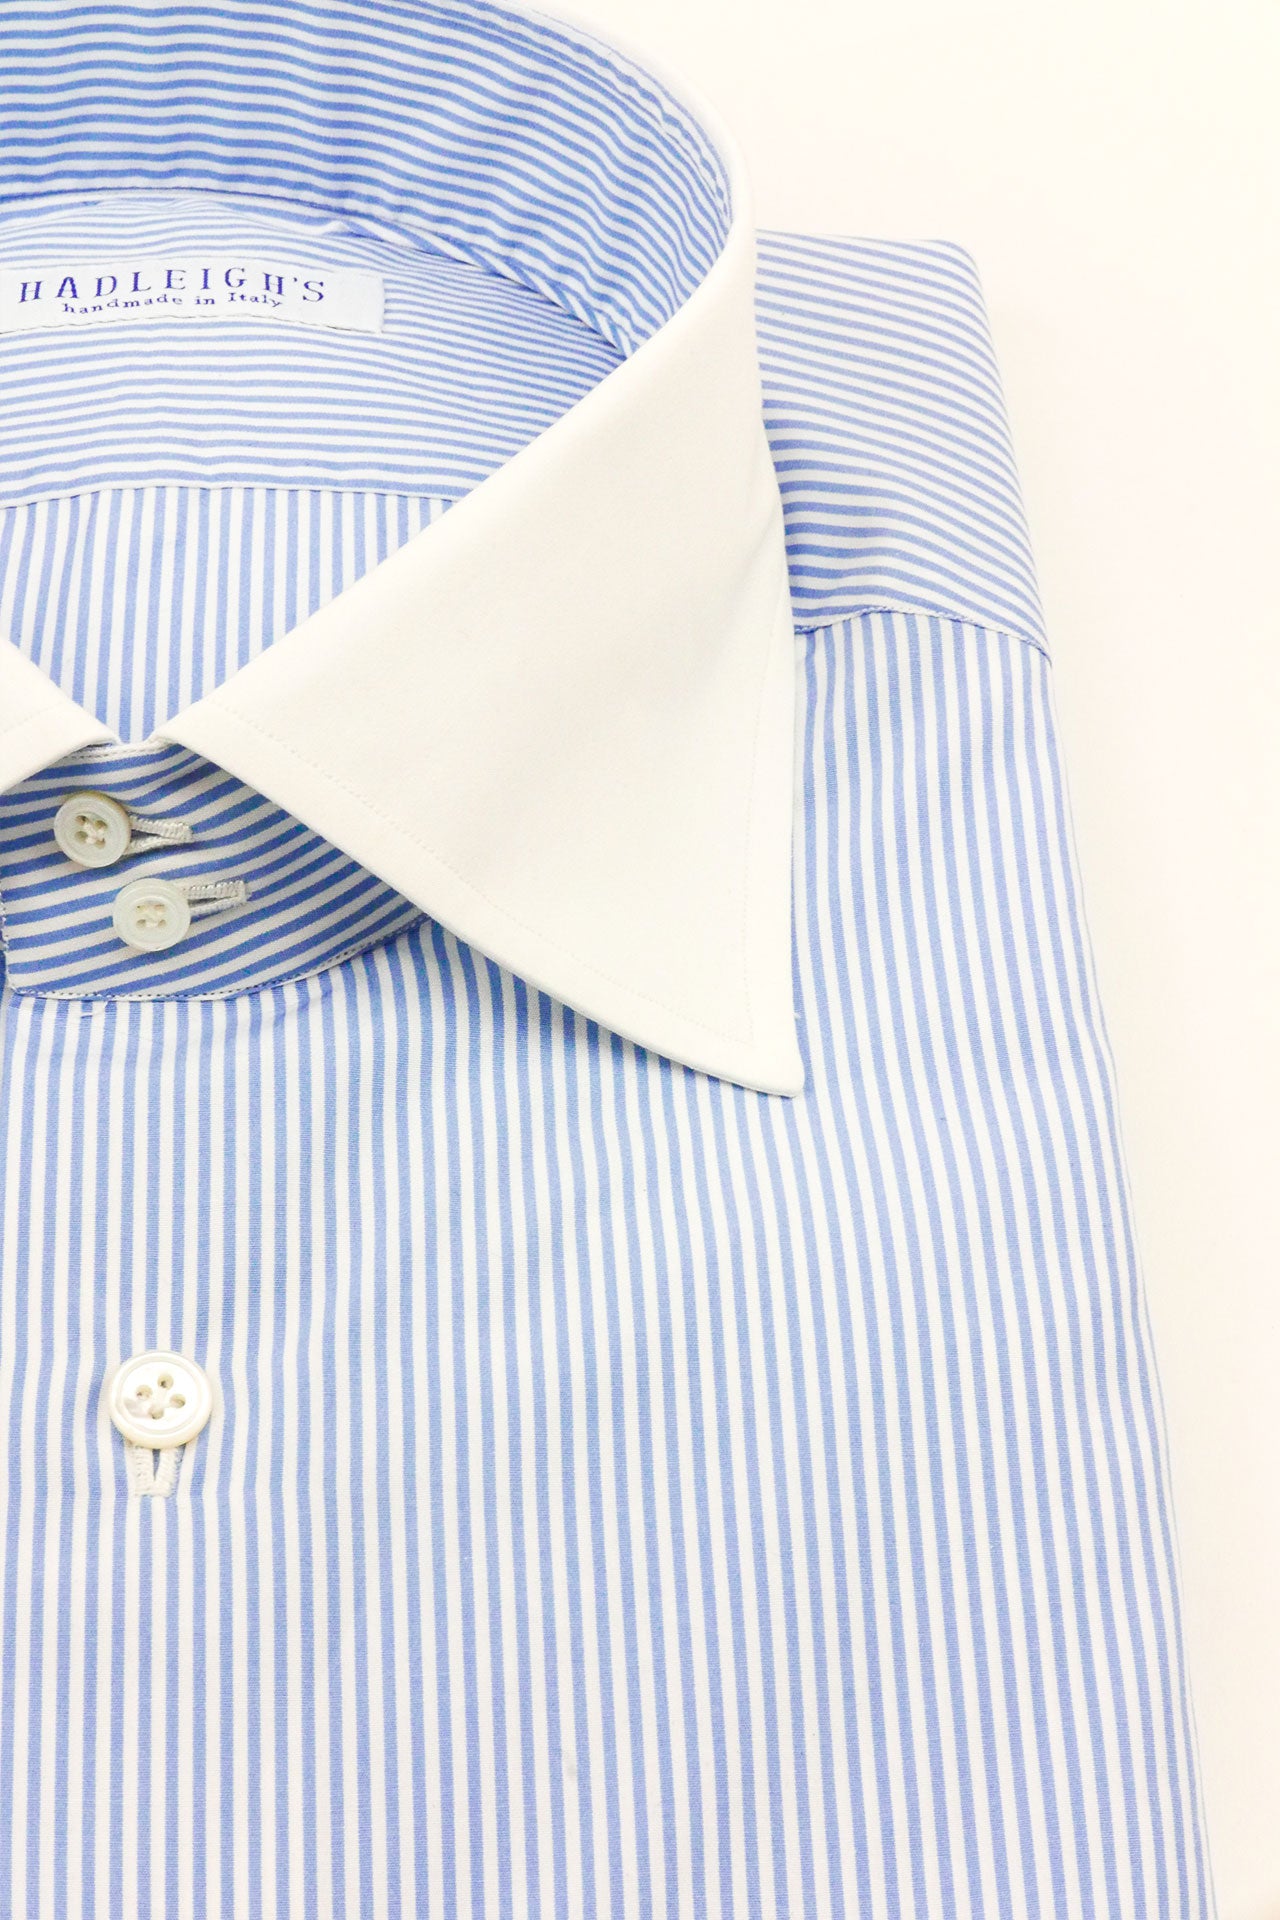 James Double Button Collar in Blue Stripe with Contrast Collar